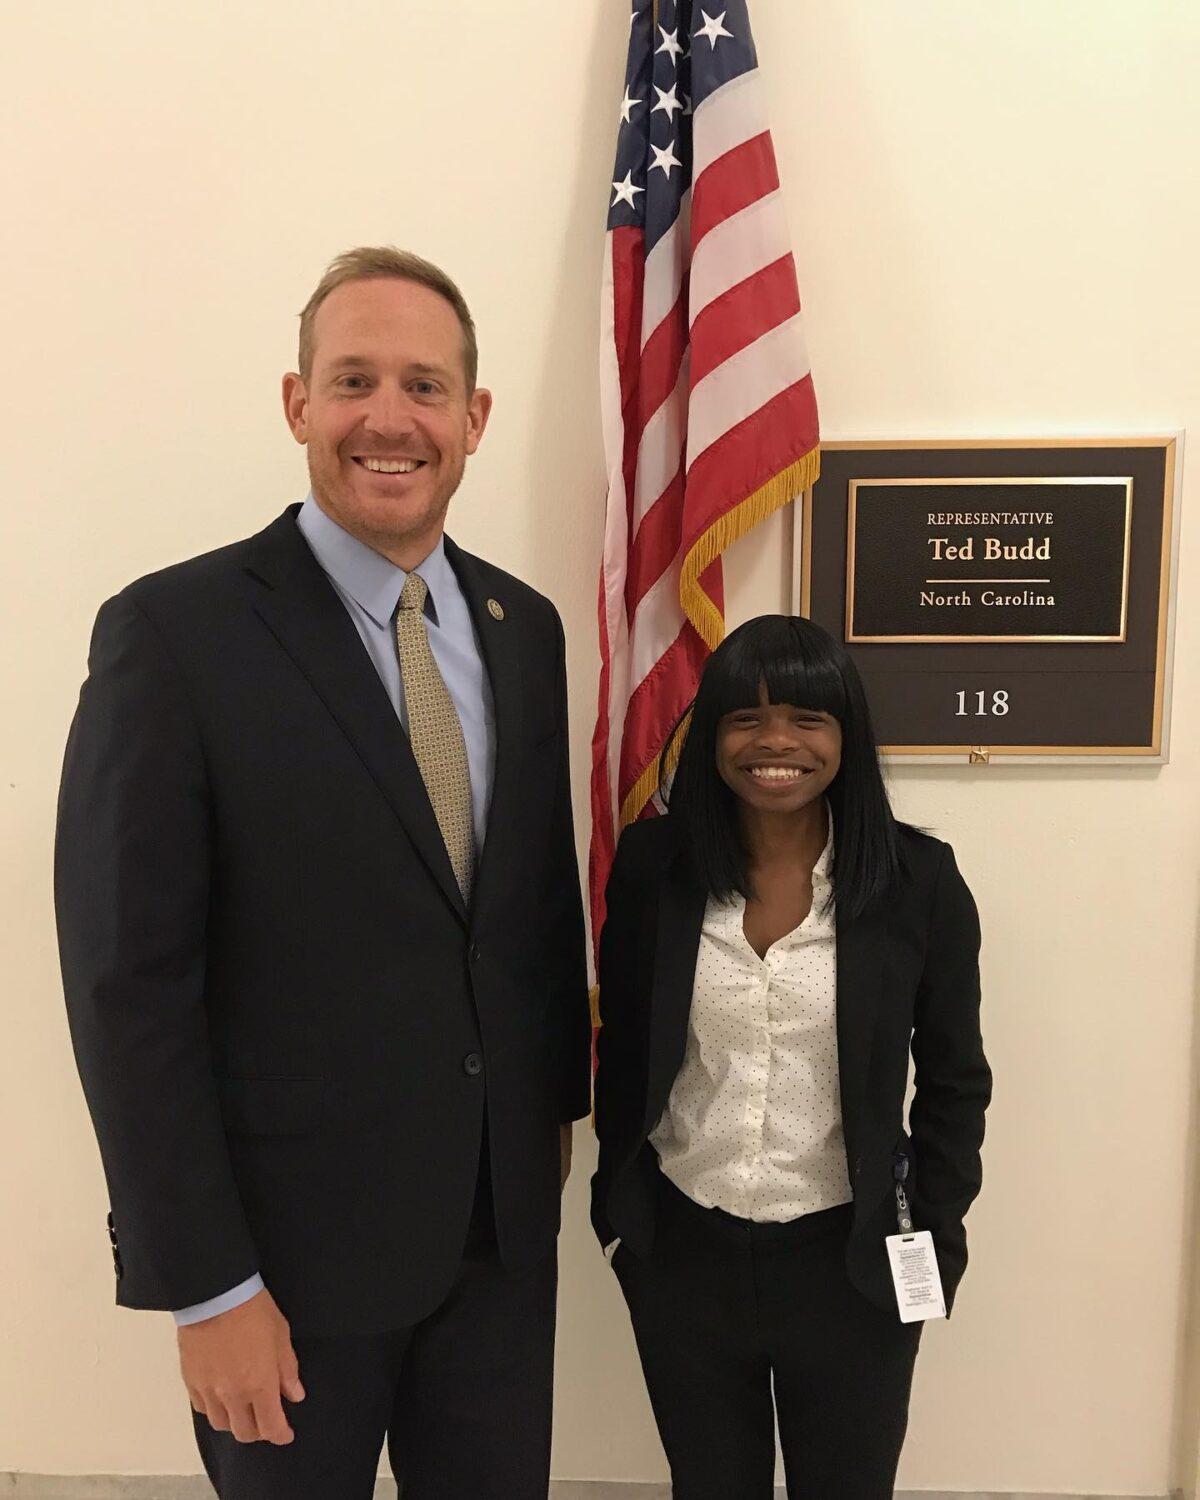 Gibson interned for Rep. Ted Budd (R-N.C) this past summer. (Courtesy of Diamond Gibson)